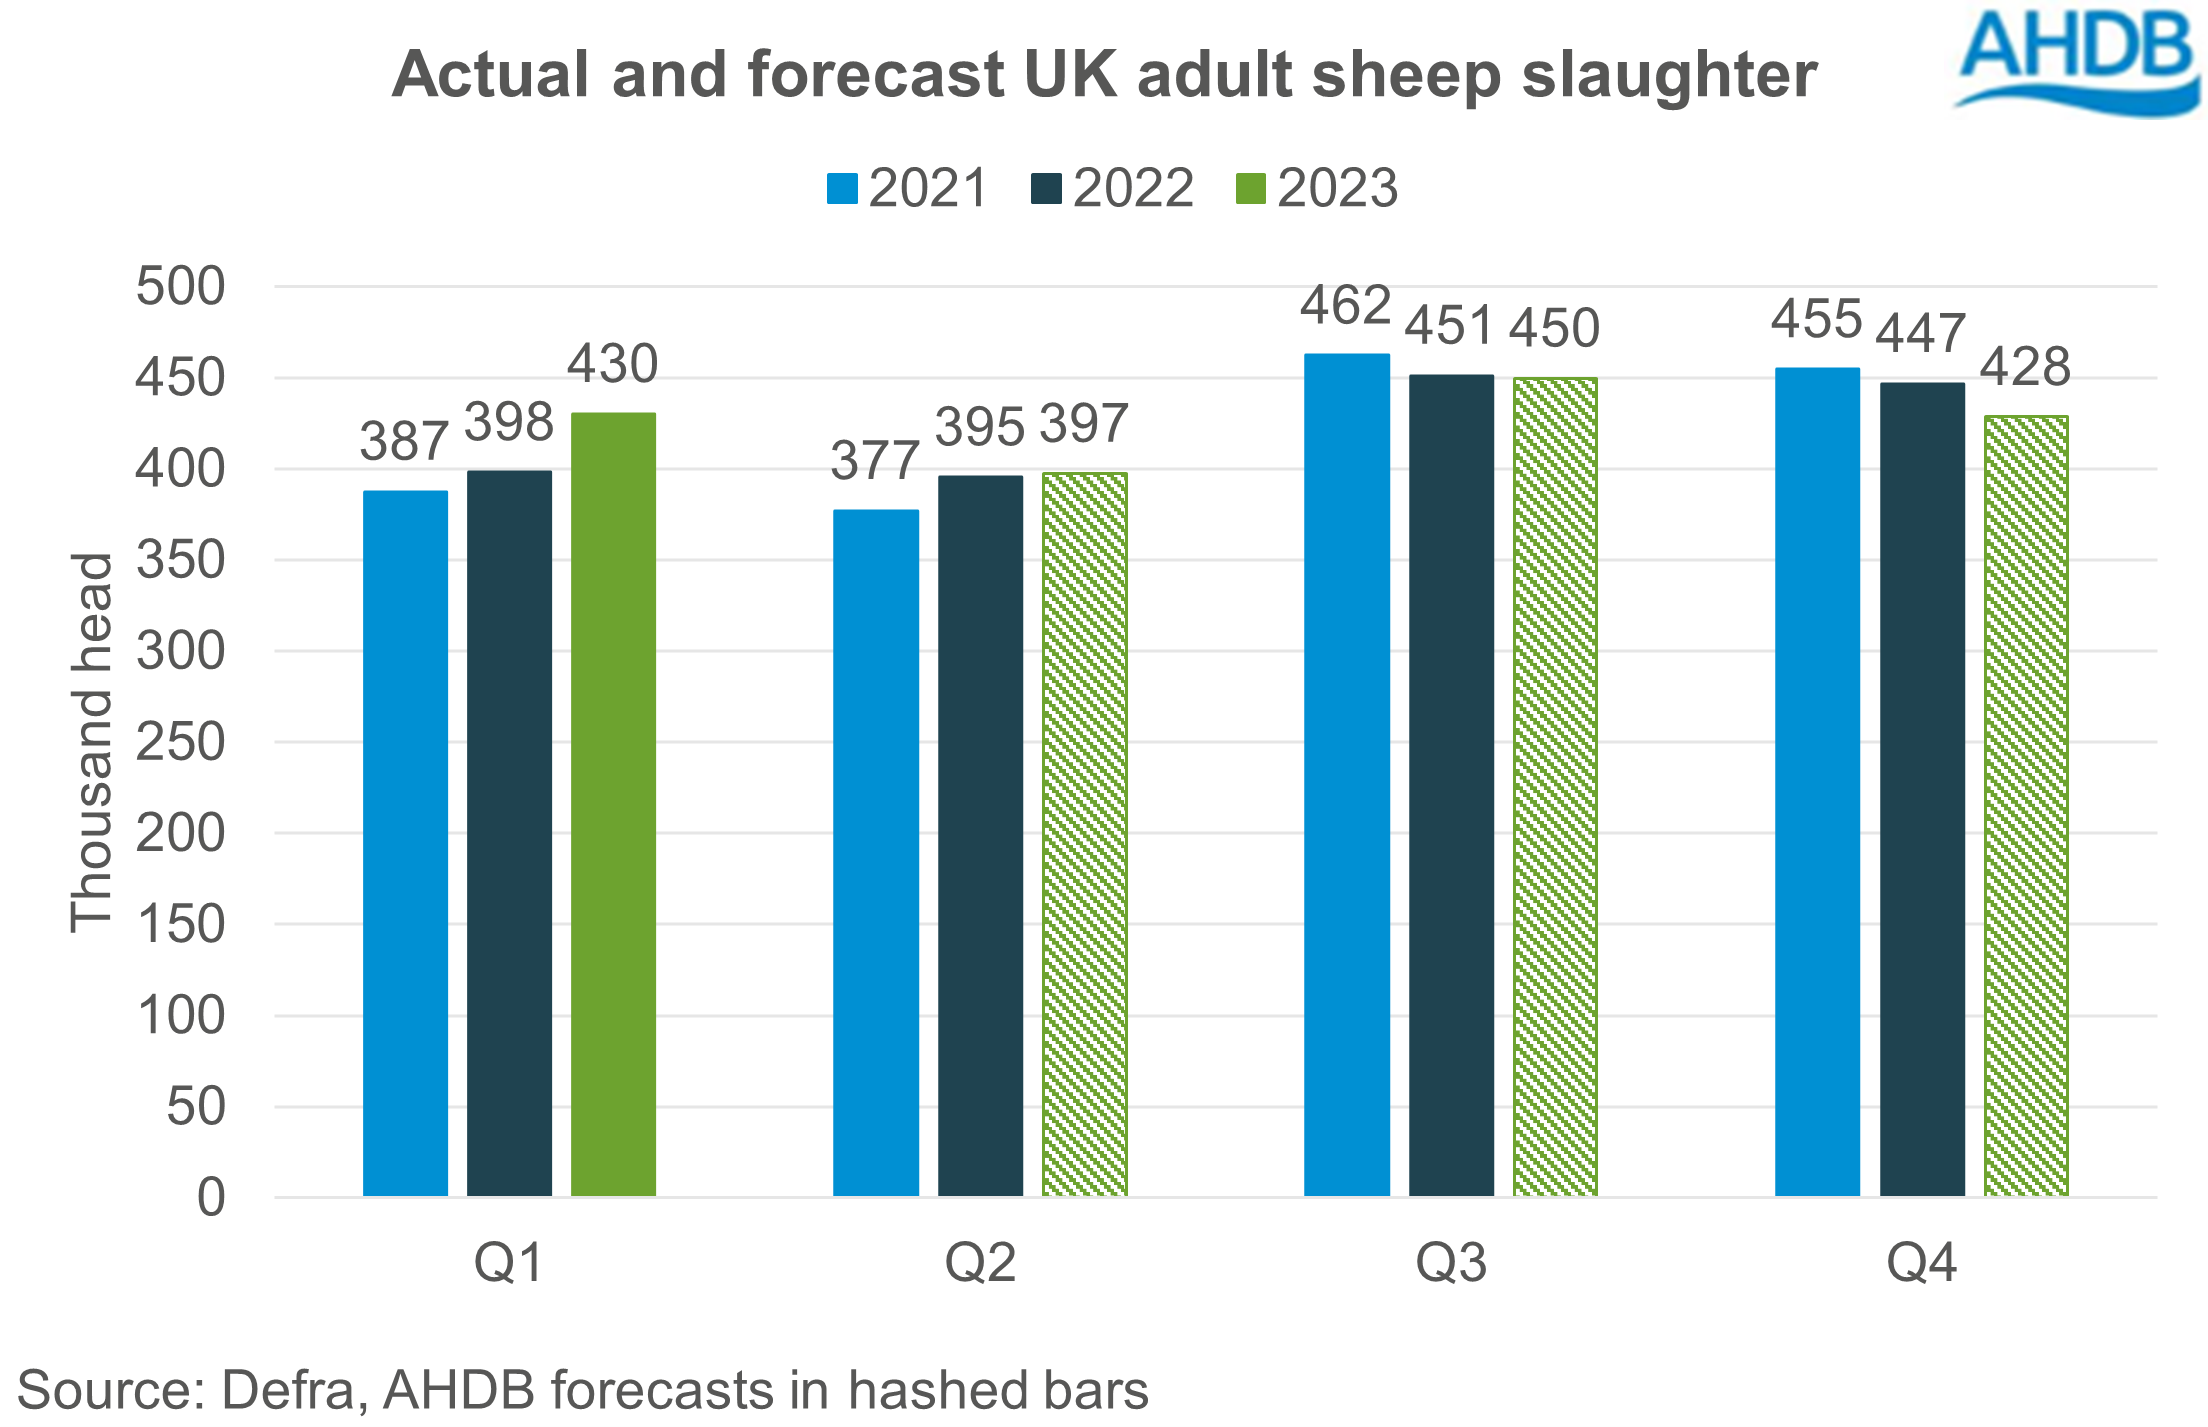 Graph showing actual and forecast quarterly UK adult sheep kill 2021-2023